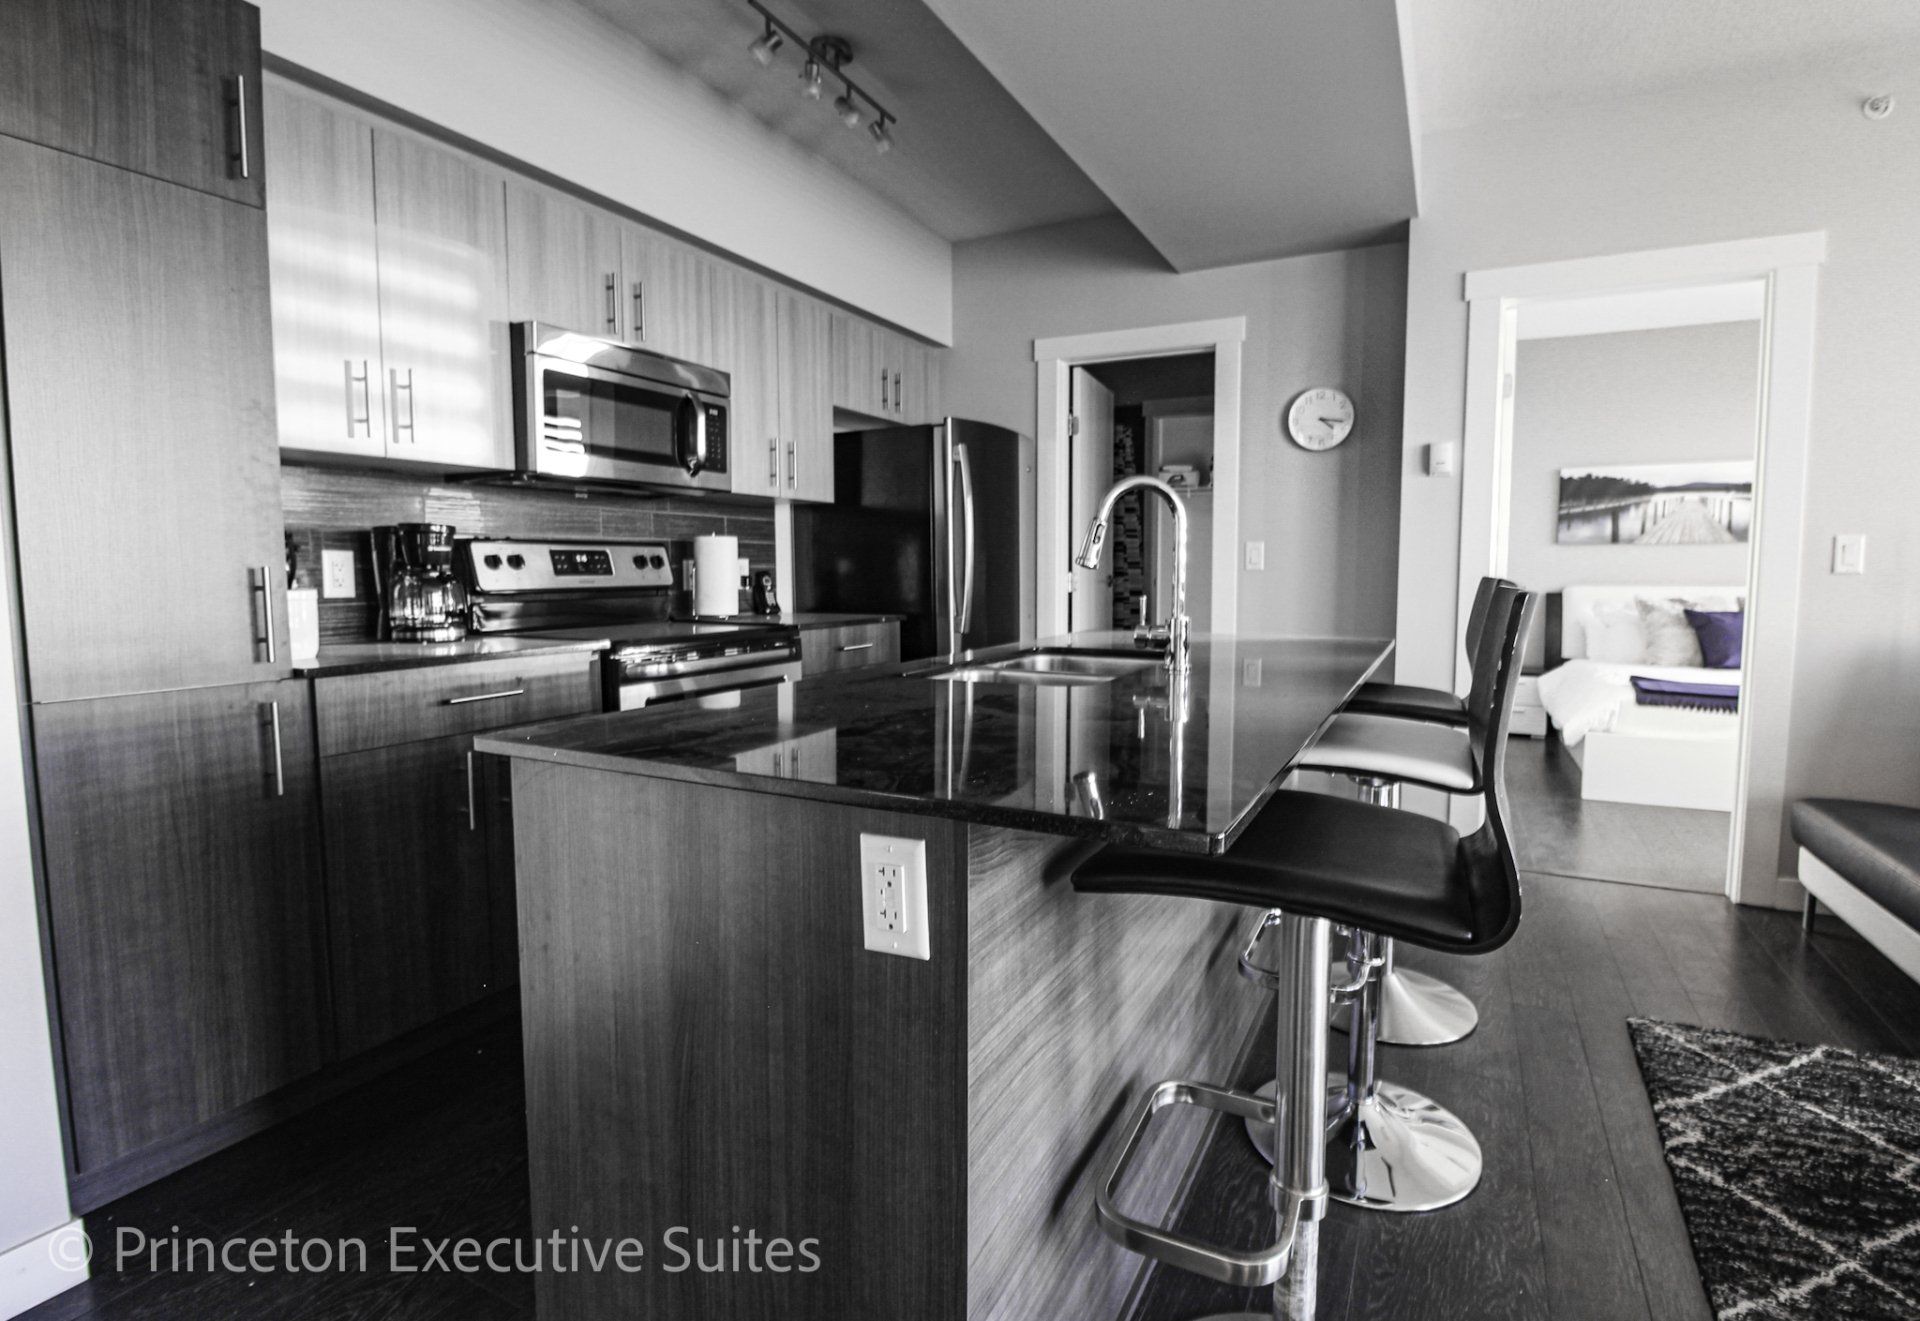 A immaculate kitchen with Grey cabinets black granite counter tops, stainless steel appliances